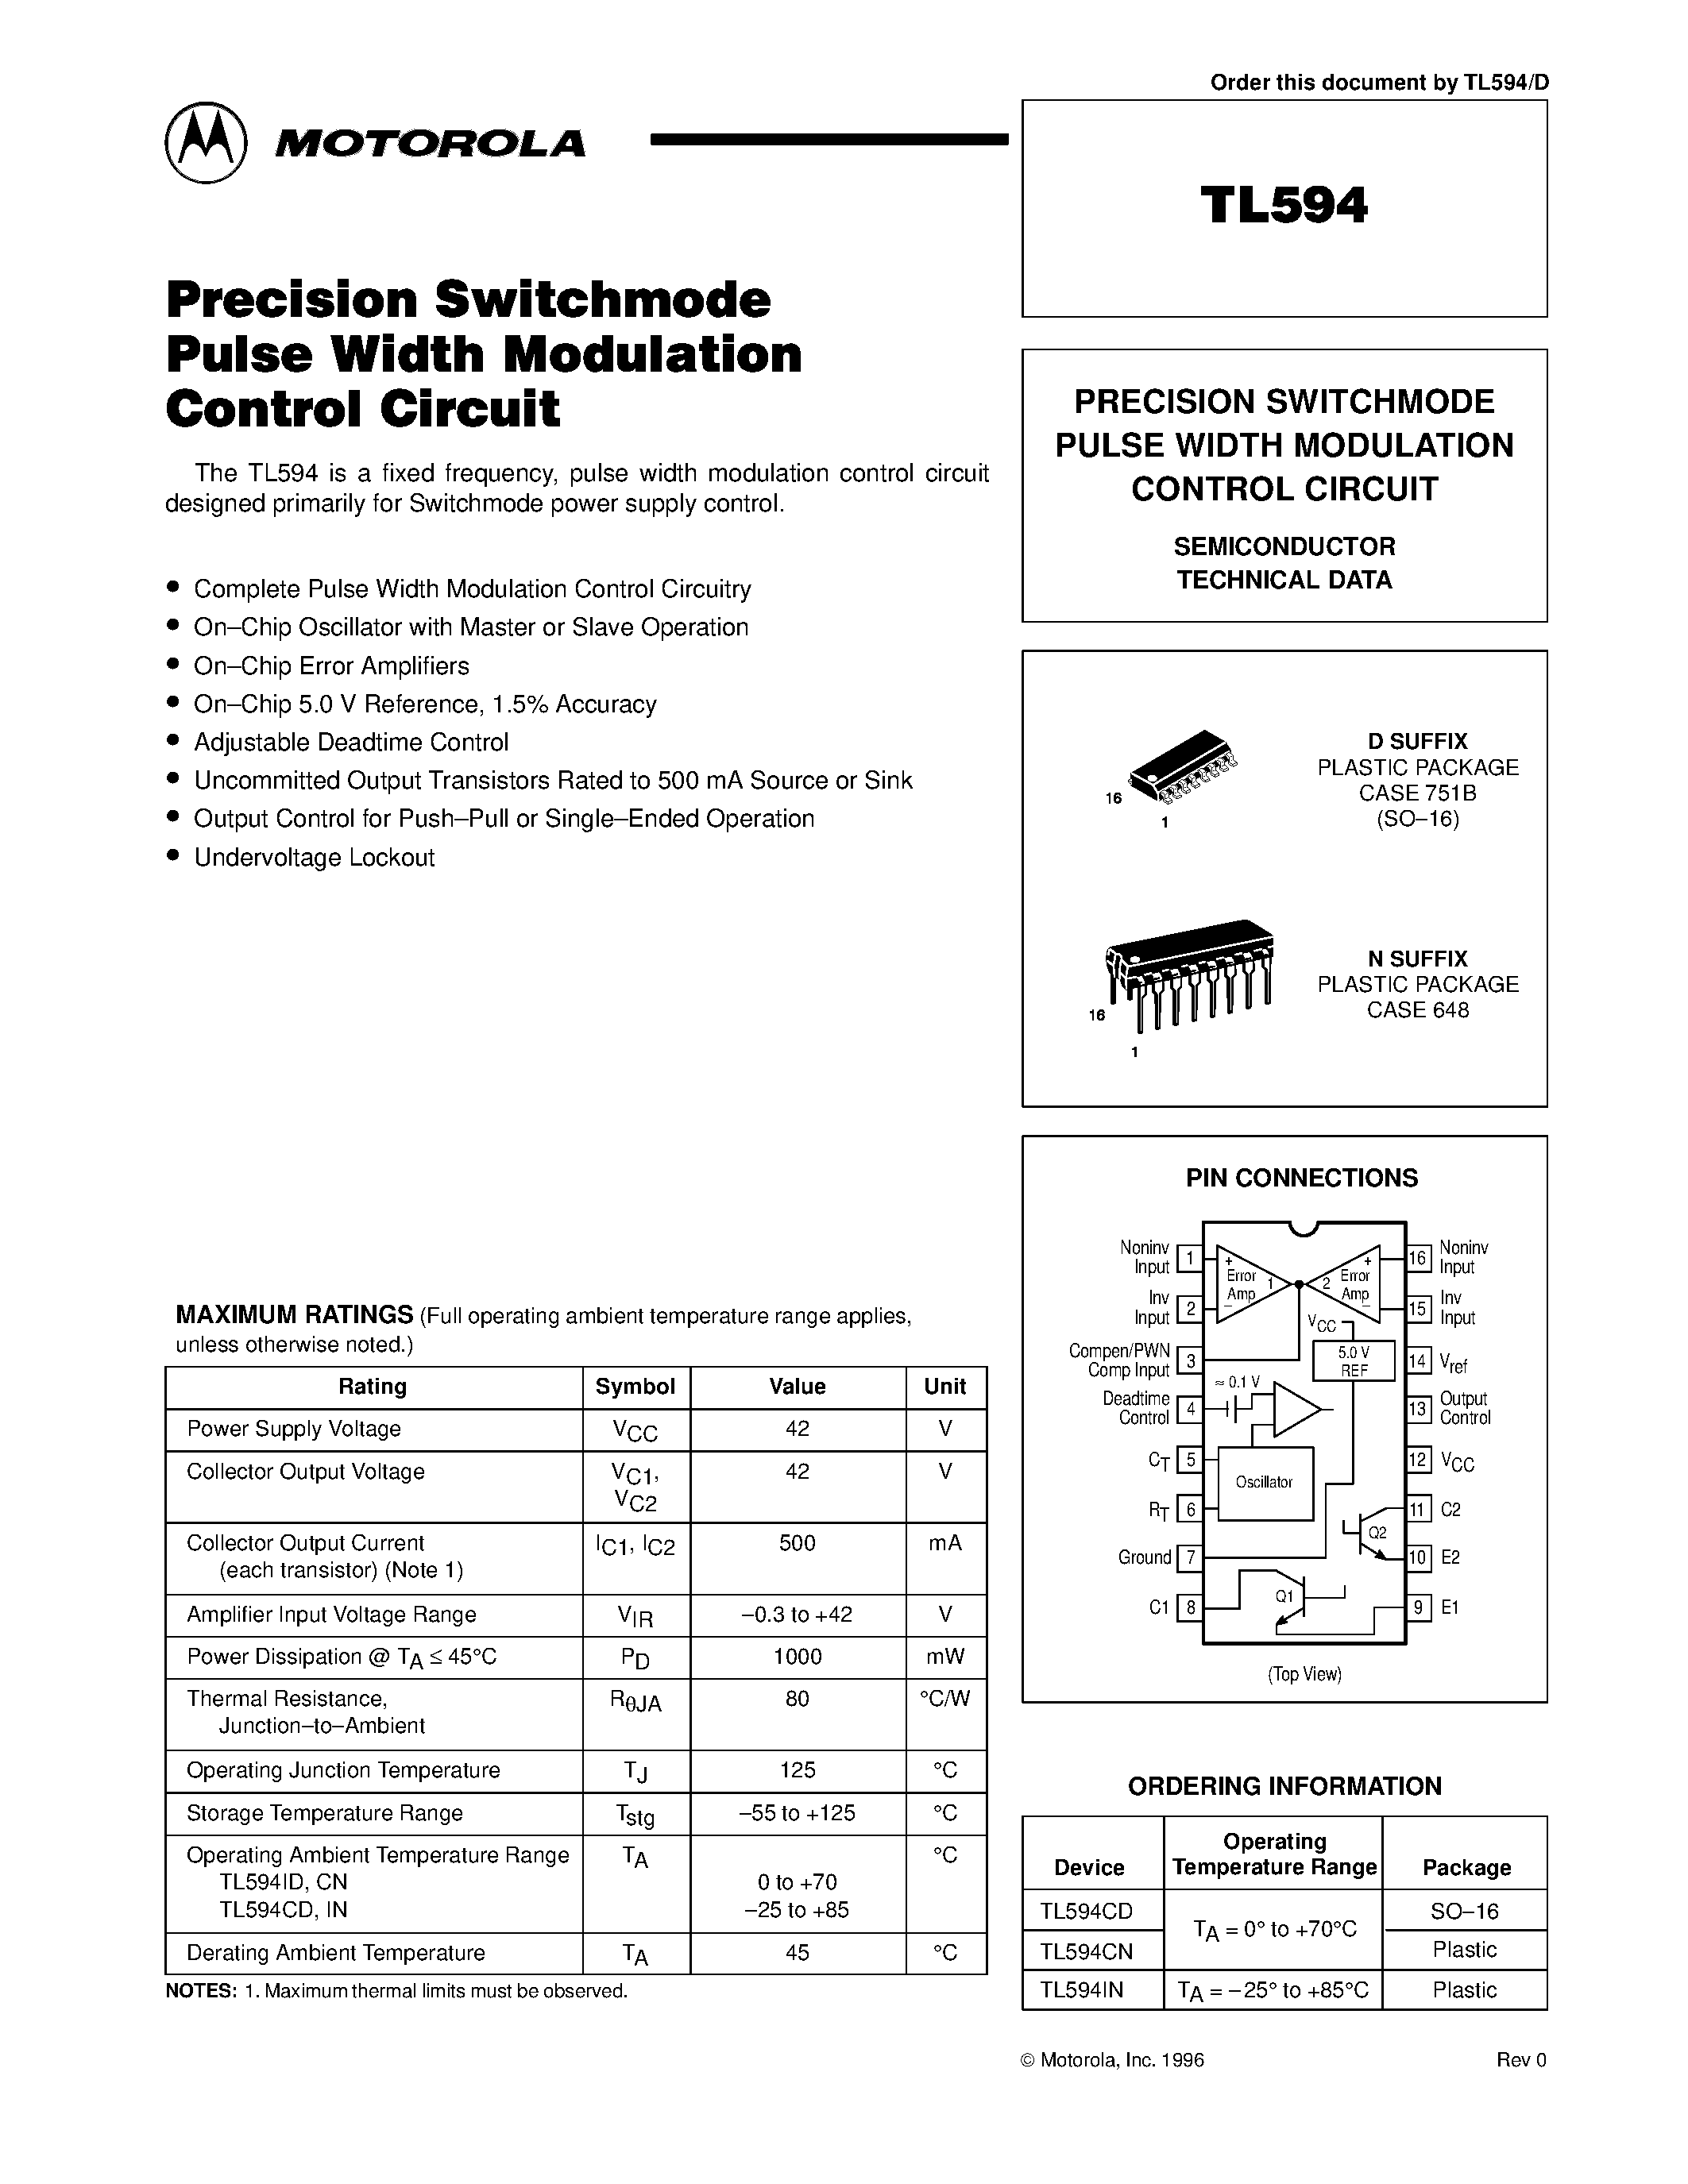 Даташит TL594IN - PRECISION SWITCHMODE PULSE WIDTH MODULATION CONTROL CIRCUIT страница 1